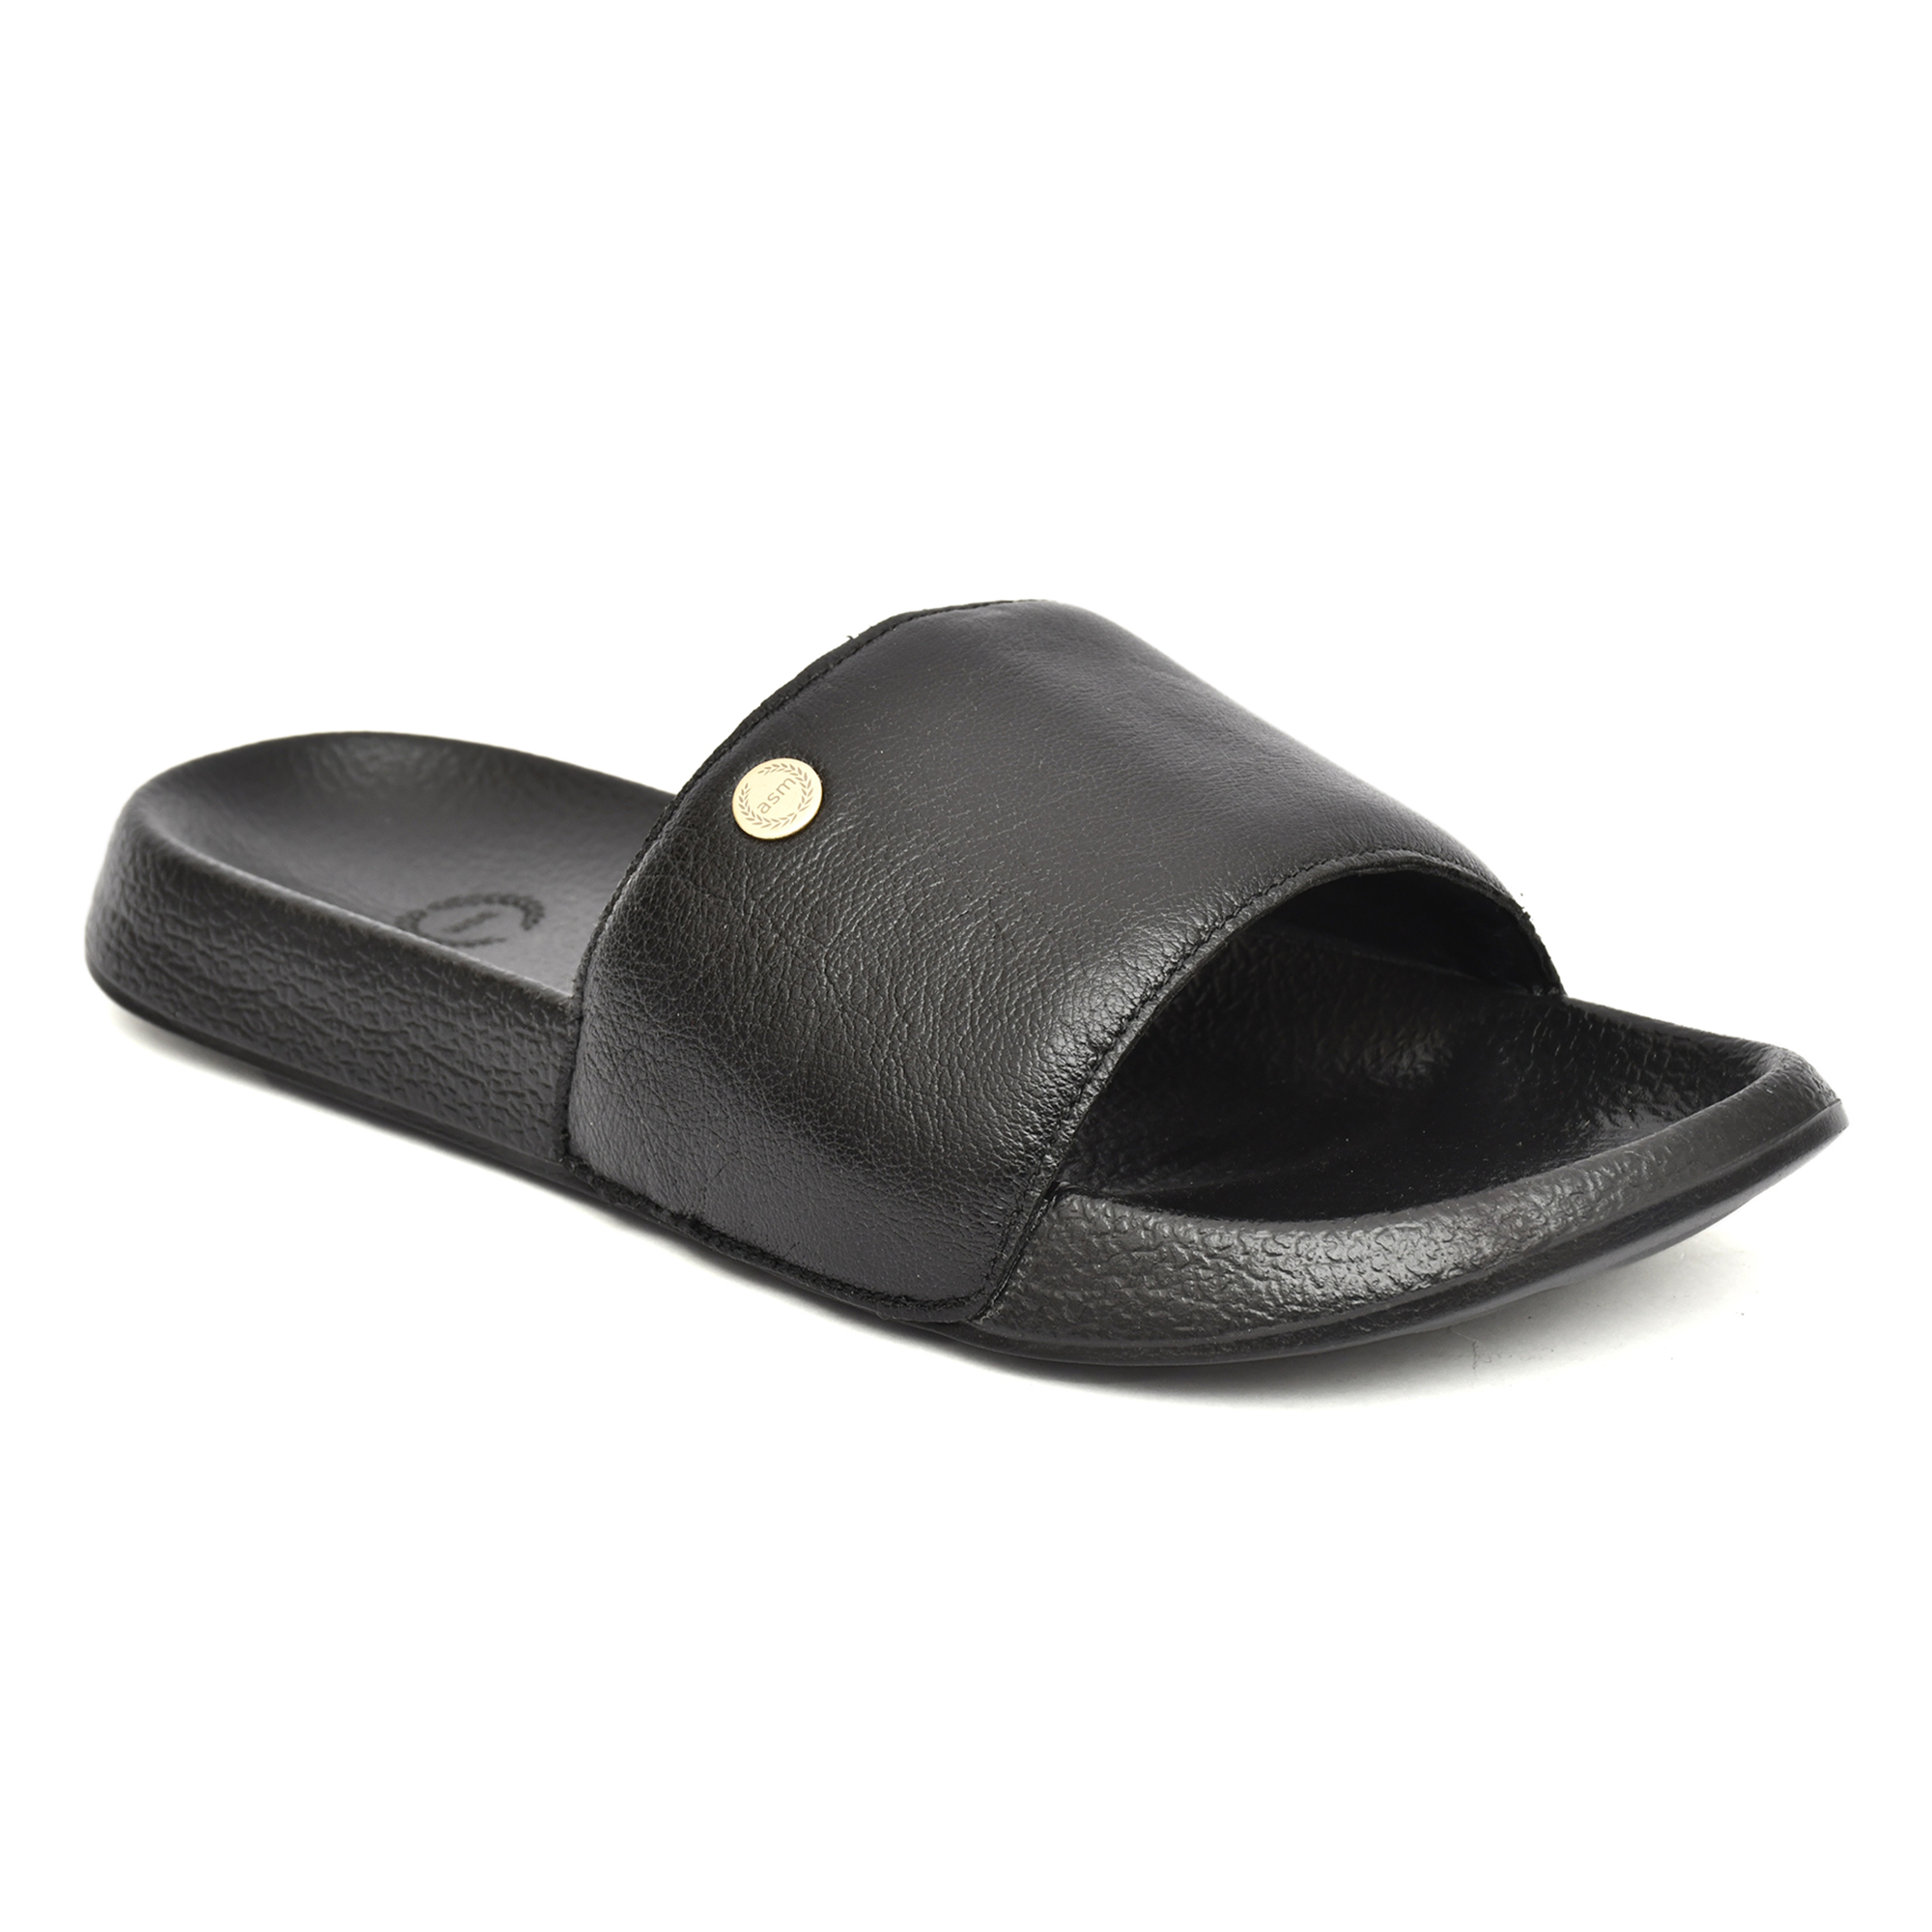 Black Leather Slippers for Men by asm.